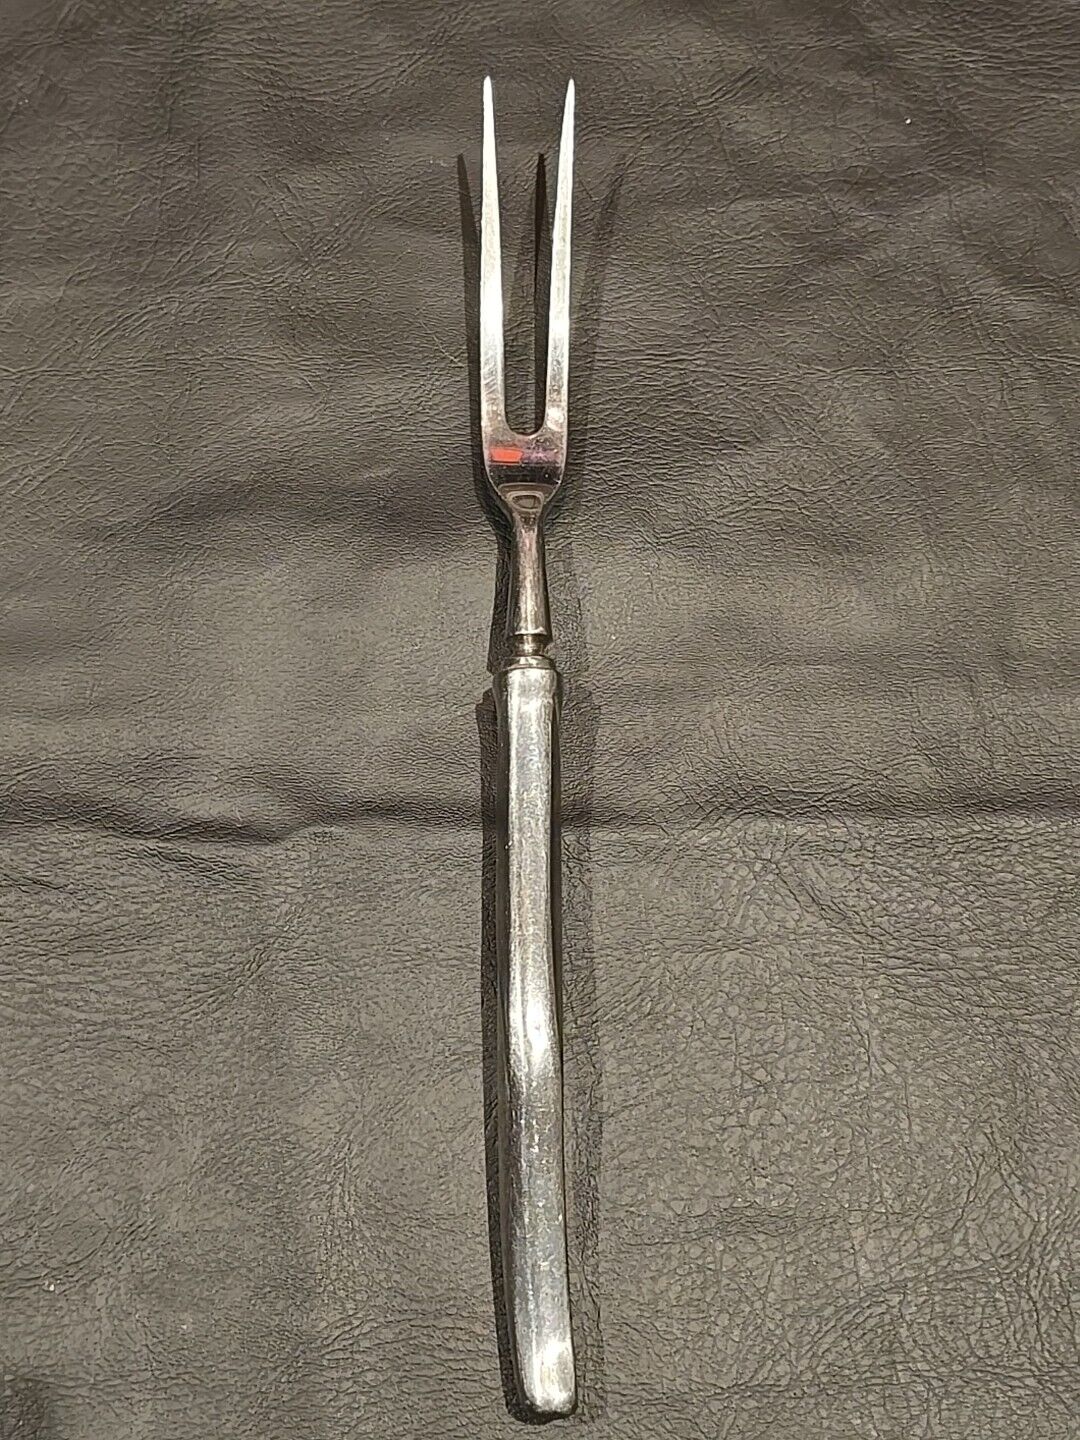 VINTAGE NASCO  stainless steel serving Fork  MADE IN JAPAN  TWO PRONG HEAVY